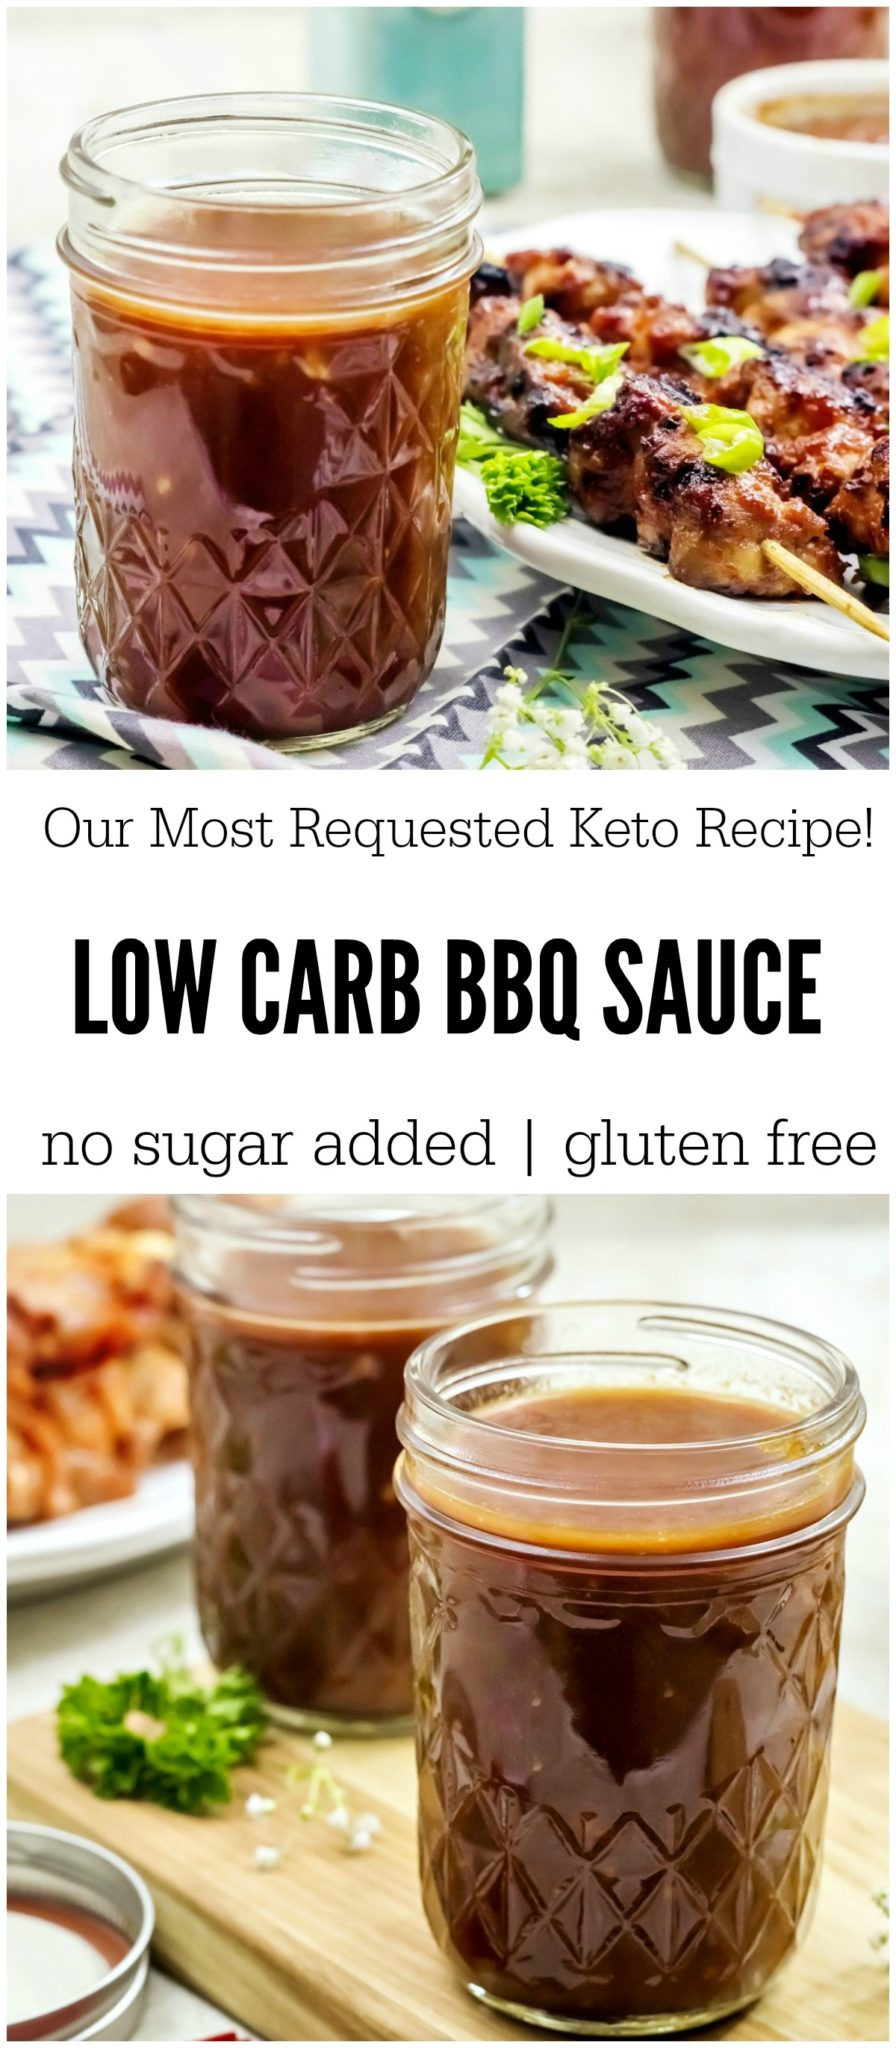 Keto Bbq Sauce Recipe
 Low Carb BBQ Sauce Our Most Requested Keto Friendly Recipe